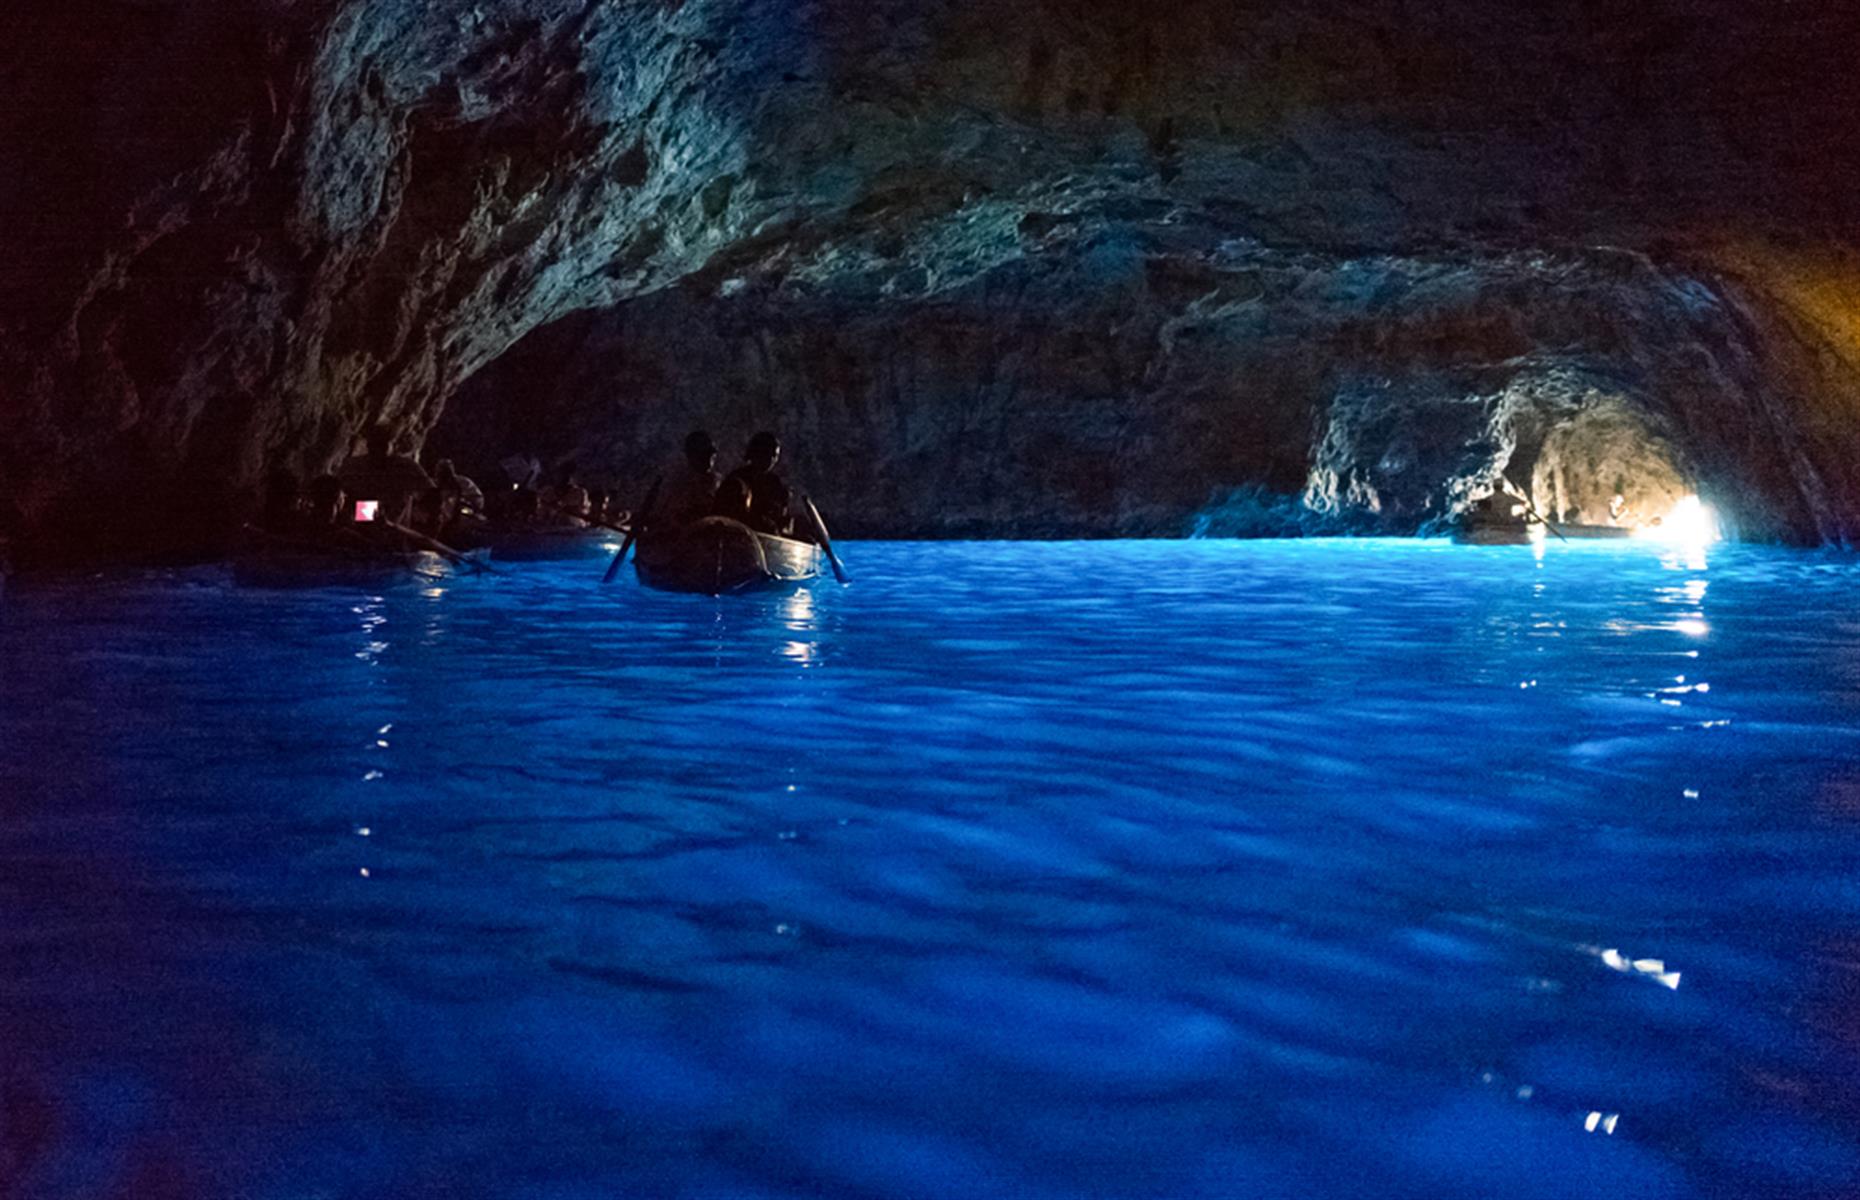 Capri, in Italy's Bay of Islands, is famous for its 'blue cave', where the sun illuminates the water from beneath the cave entrance and gives it that piercing bright blue color. It’s a small cavern and dozens of wooden rowboats bring tourists here each day when the weather is good (early afternoon is the best time to see the blue at its most mesmerizing).